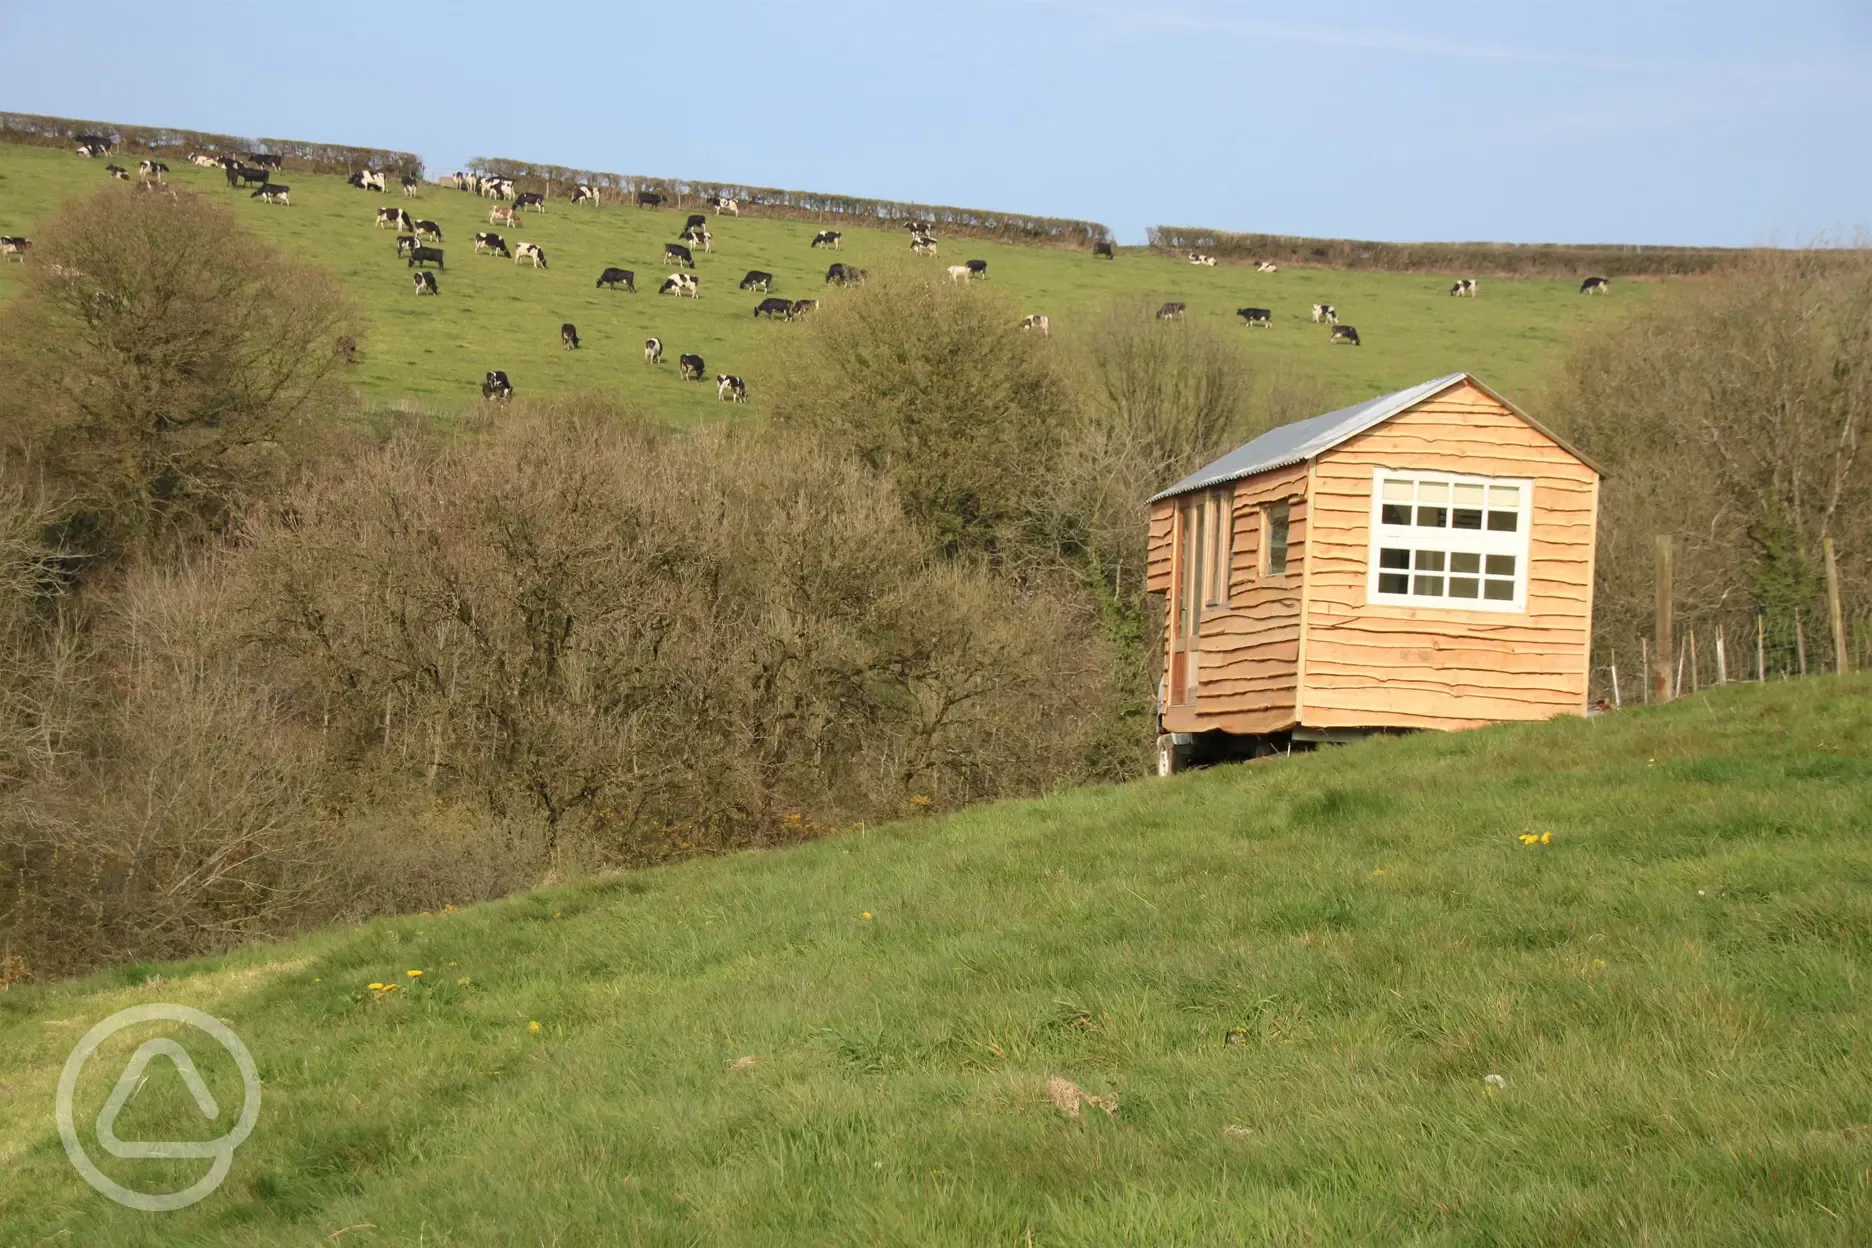 The Lodge is located at the top of our wildflower meadow